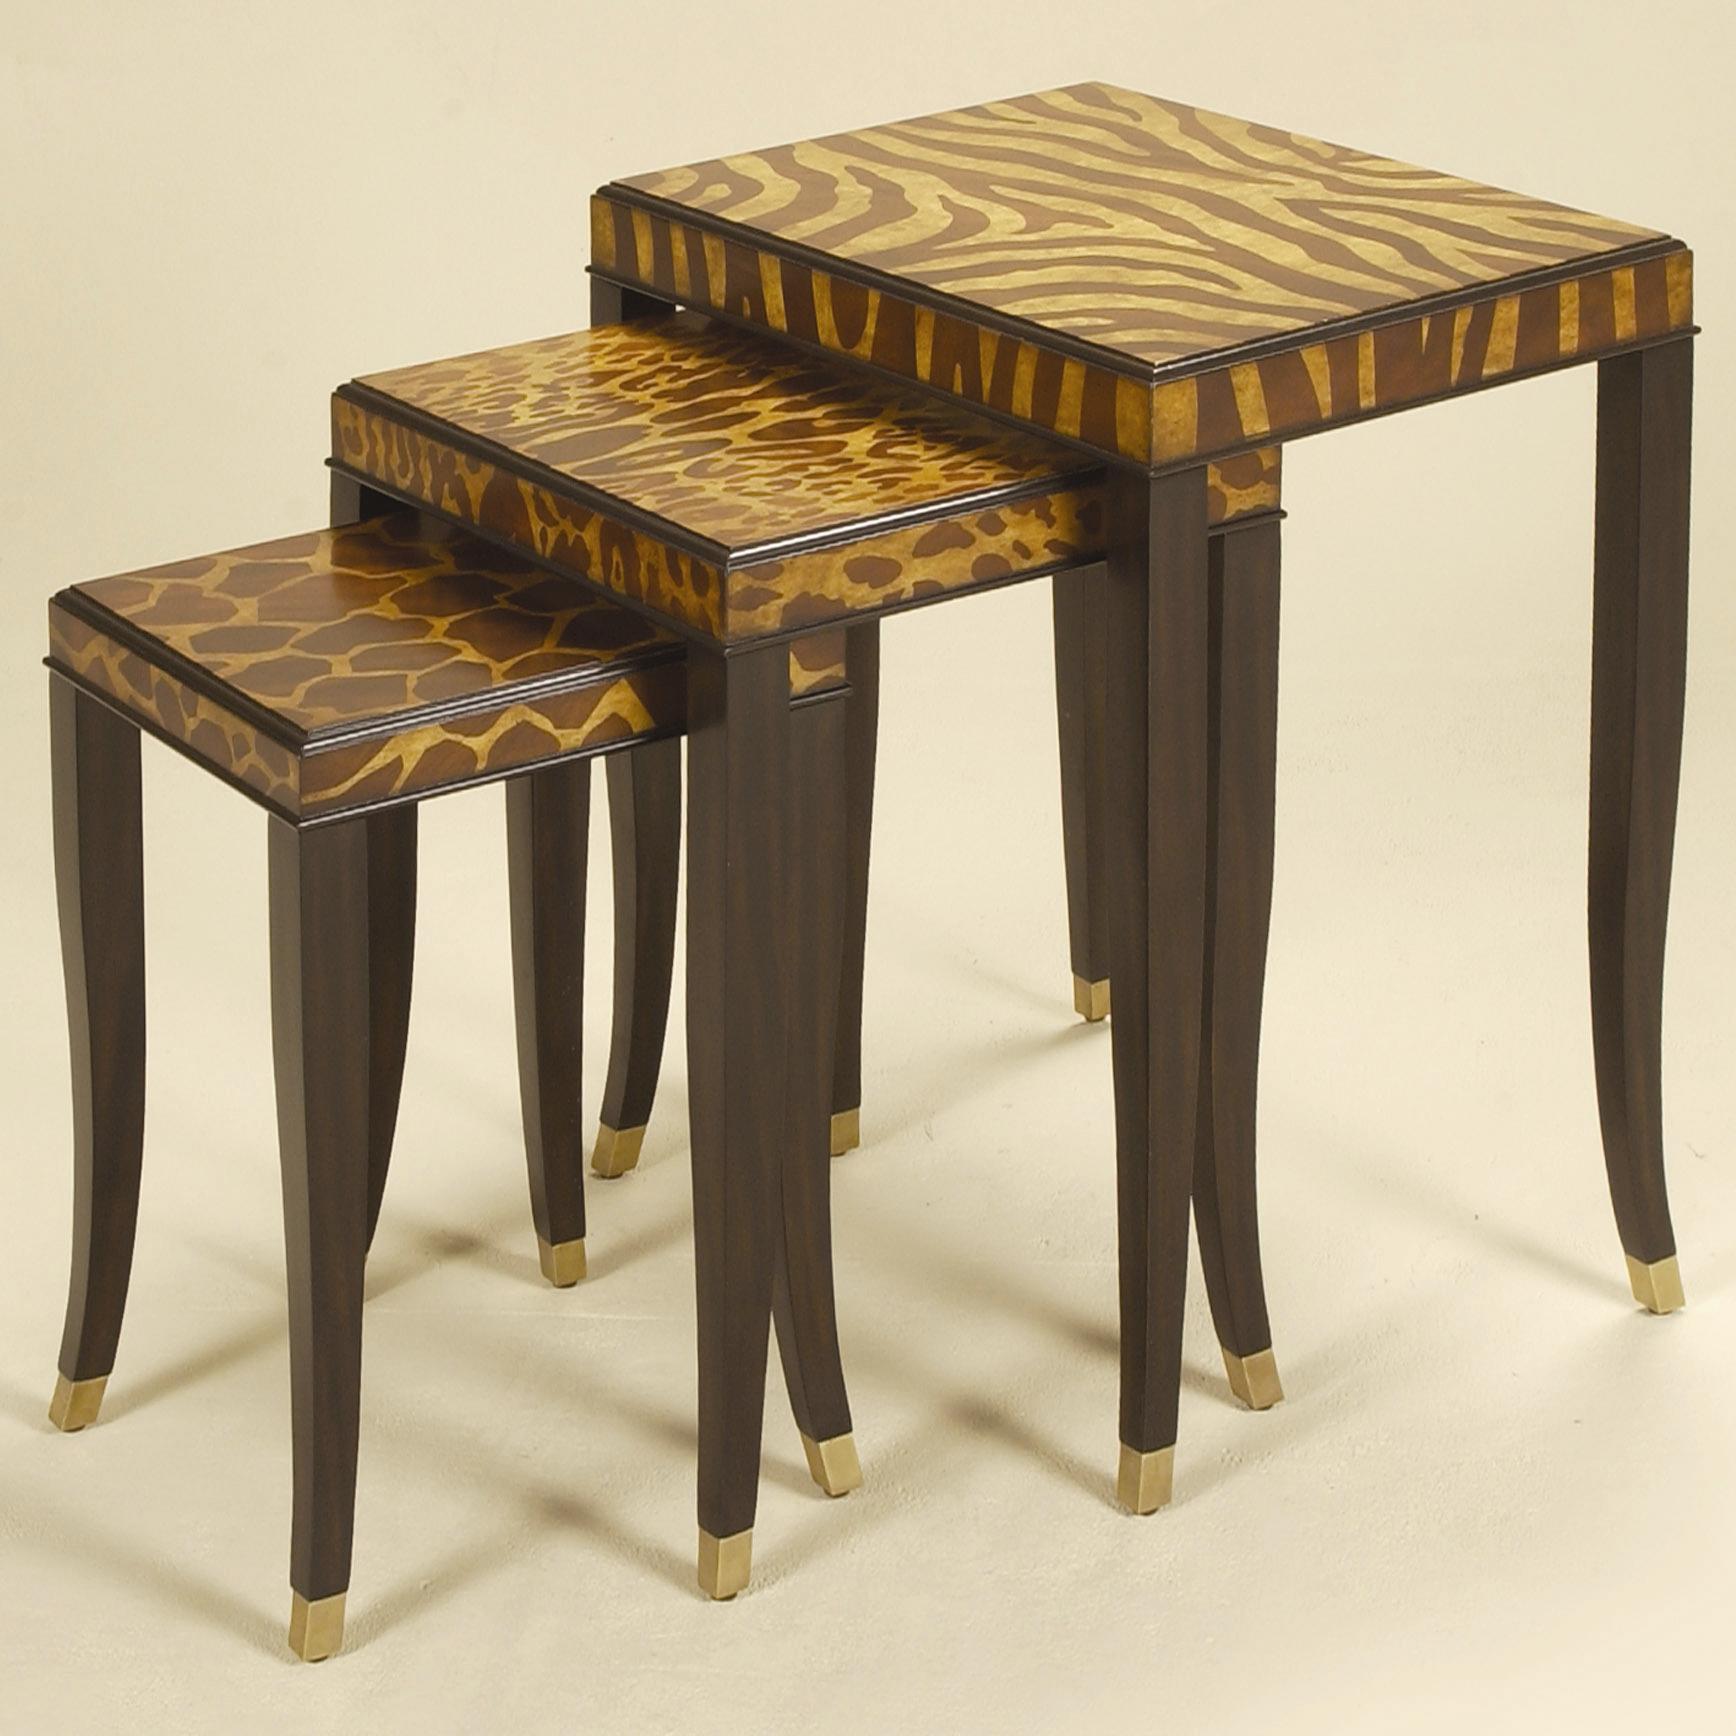 Set of Three Ebony Finished Nest of Tables with Marquetry Inlay in Animal Motif